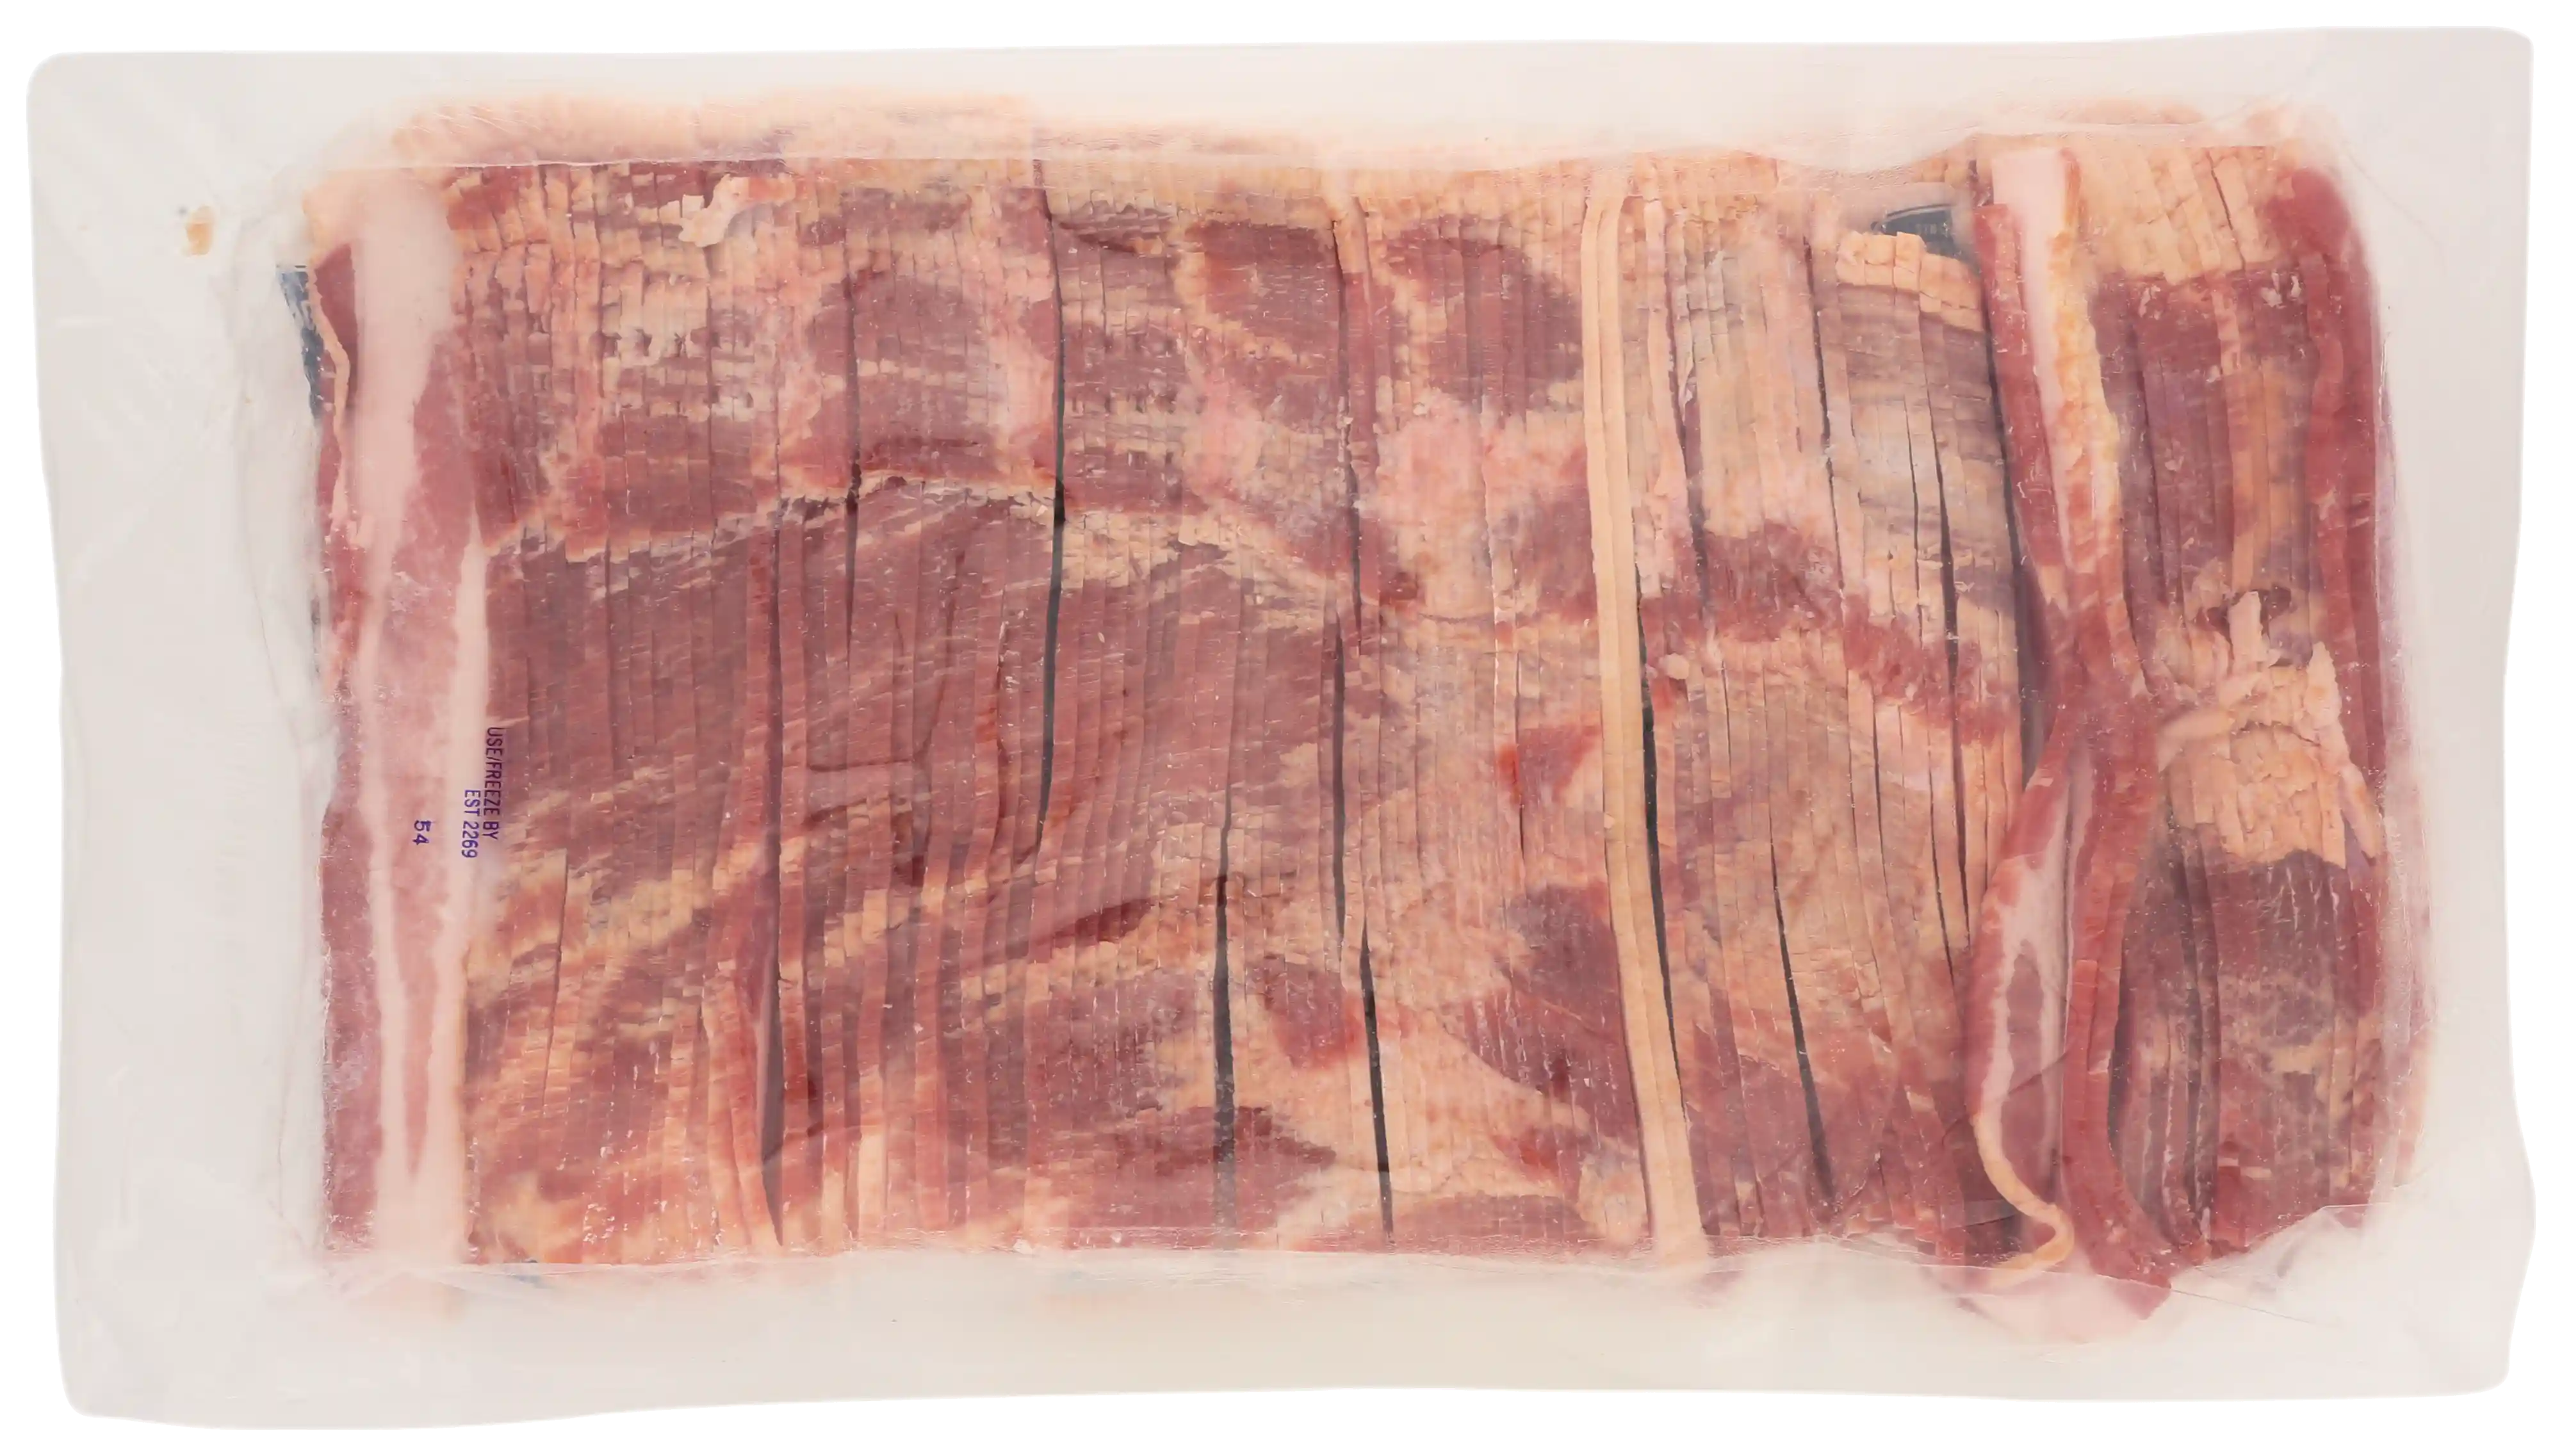 Wright® Brand Naturally Applewood Smoked Thick Sliced Bacon, Bulk, 10-14 Slices per Pound, Gas Flushed_image_21